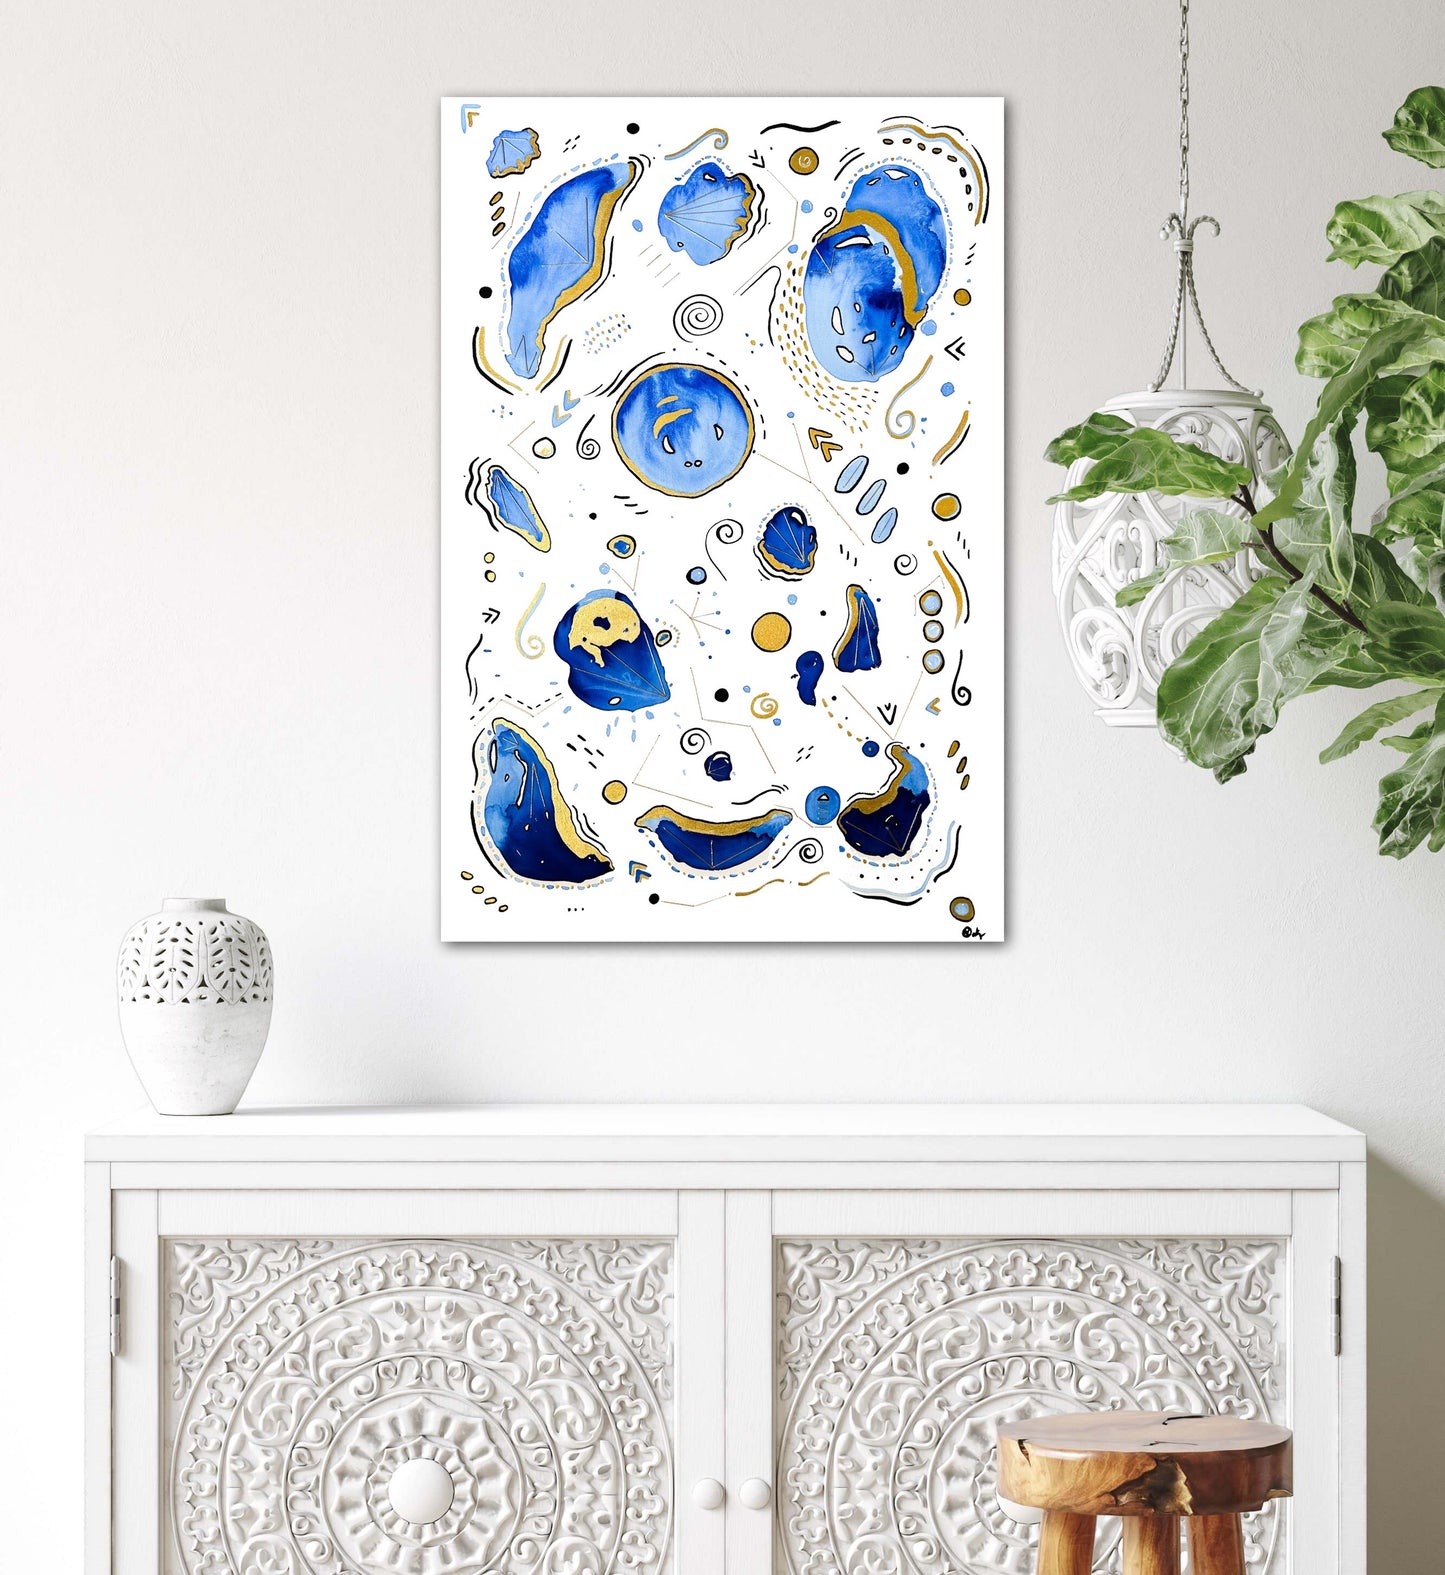 SOLAR SEA - Original Watercolor, Ink, & Thread Painting on Canvas - Blue & Gold